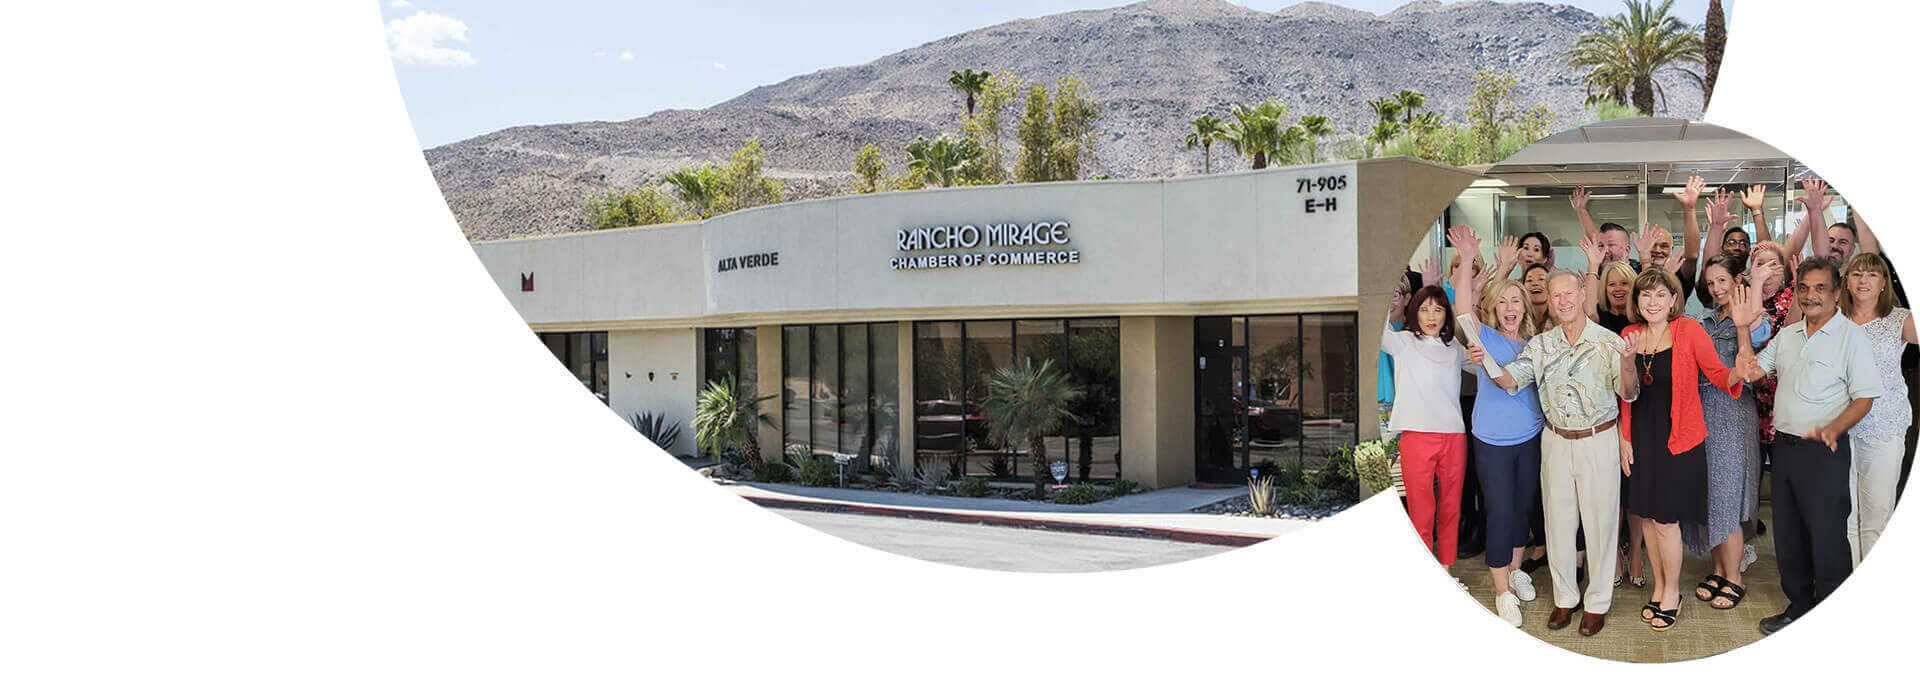 Rancho Mirage Chamber Of Commerce